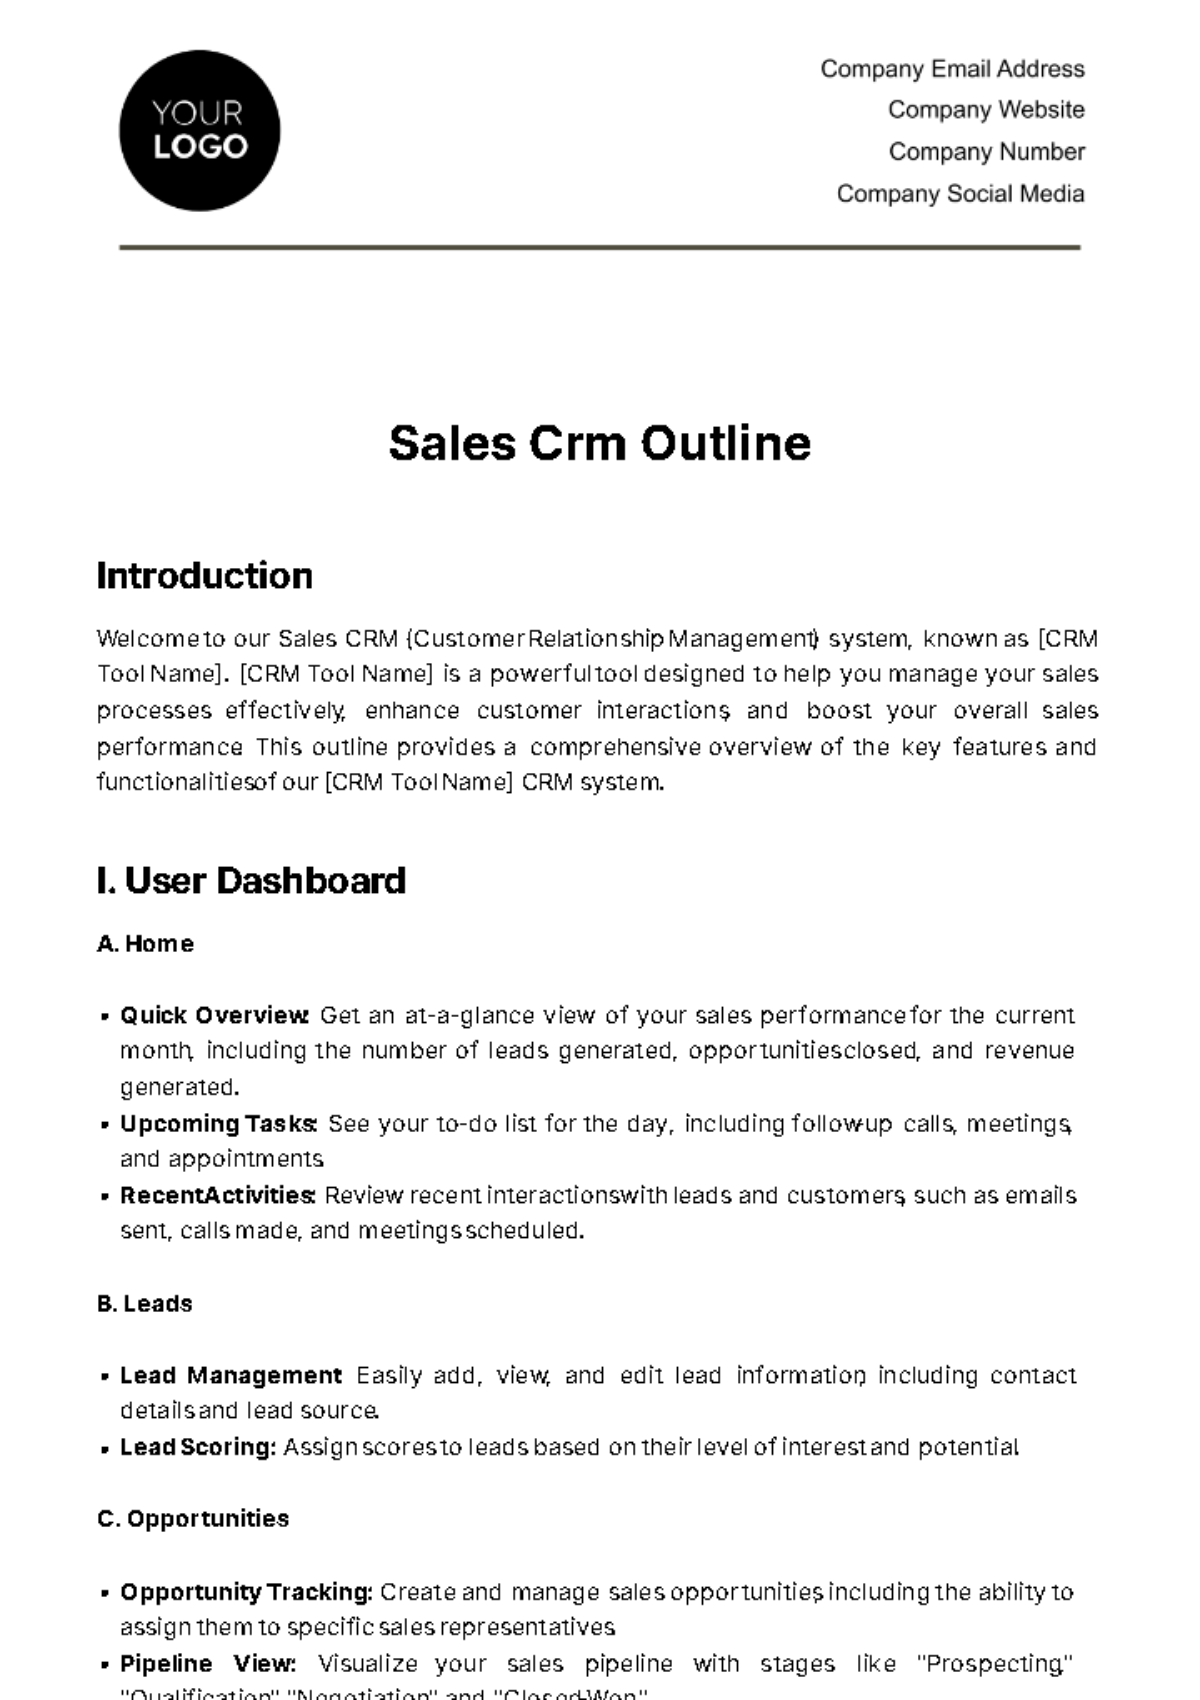 Free Sales CRM Outline Template